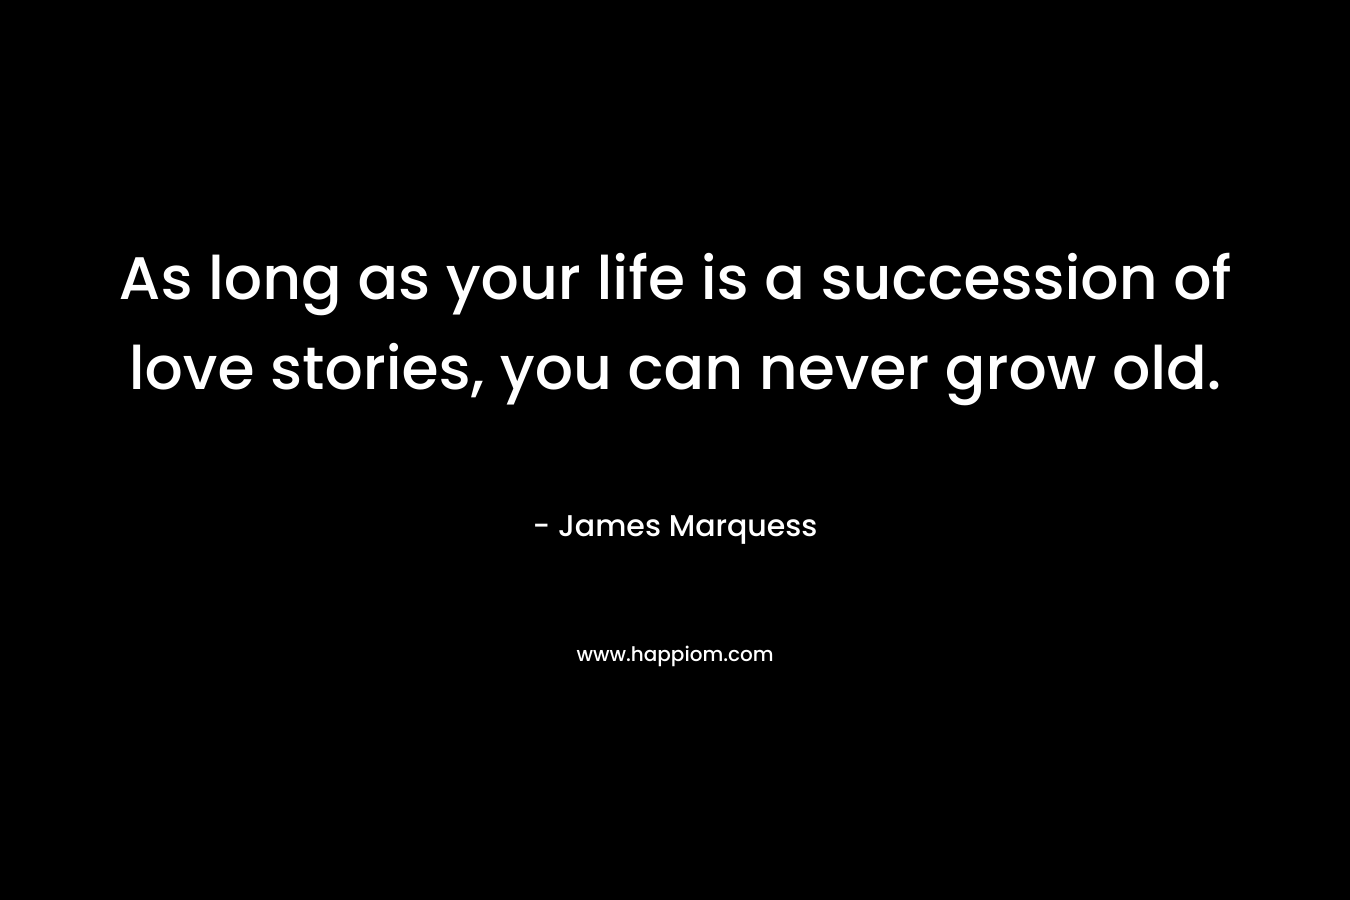 As long as your life is a succession of love stories, you can never grow old.